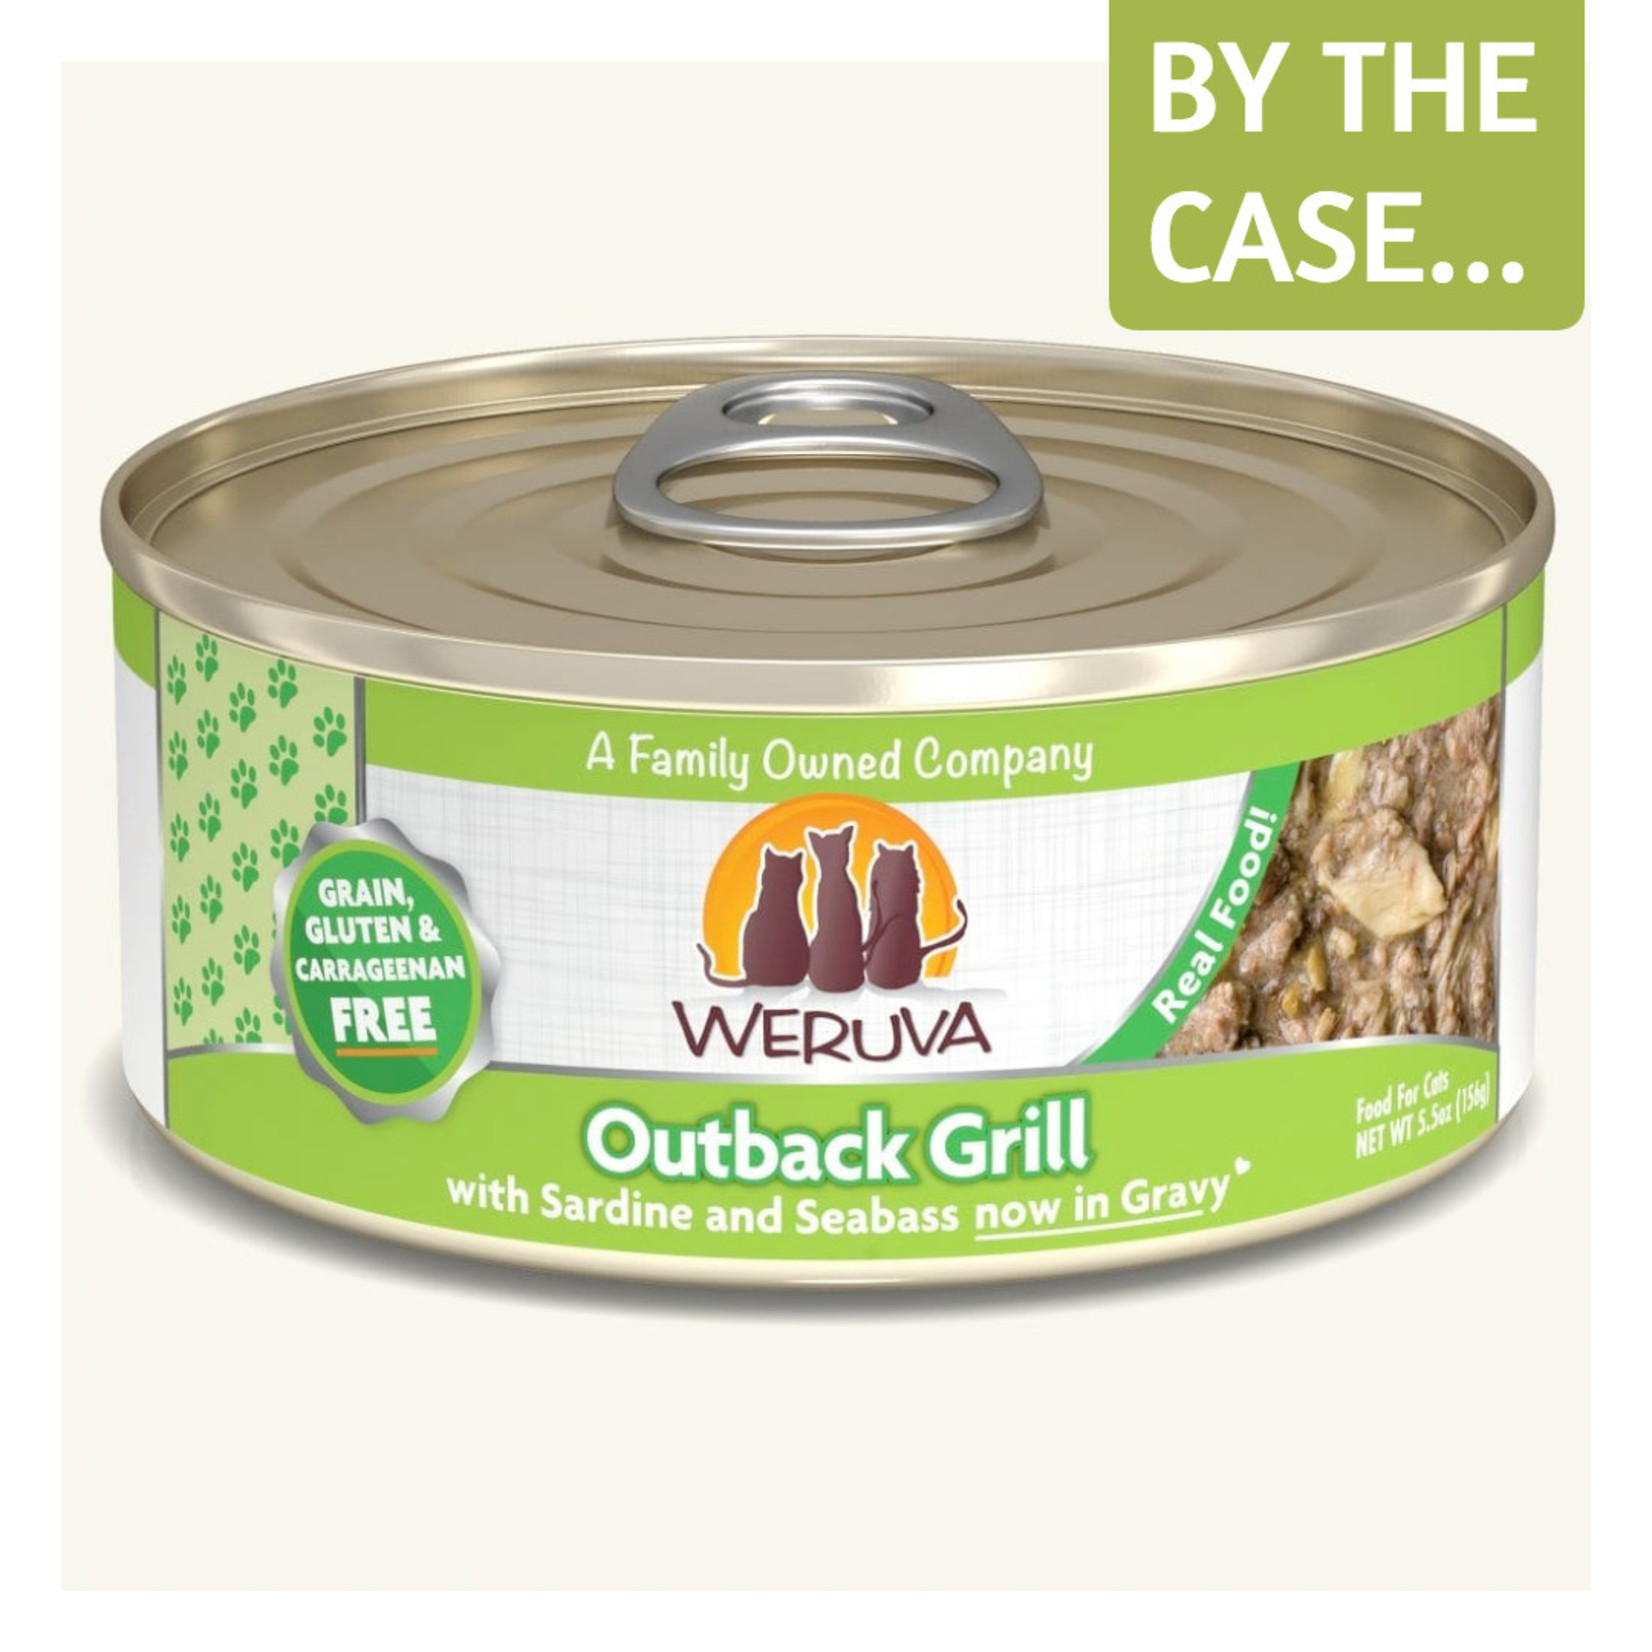 Weruva Weruva Classic Wet Cat Food Outback Grill with Sardine and Seabass in Gravy 5.5oz Can